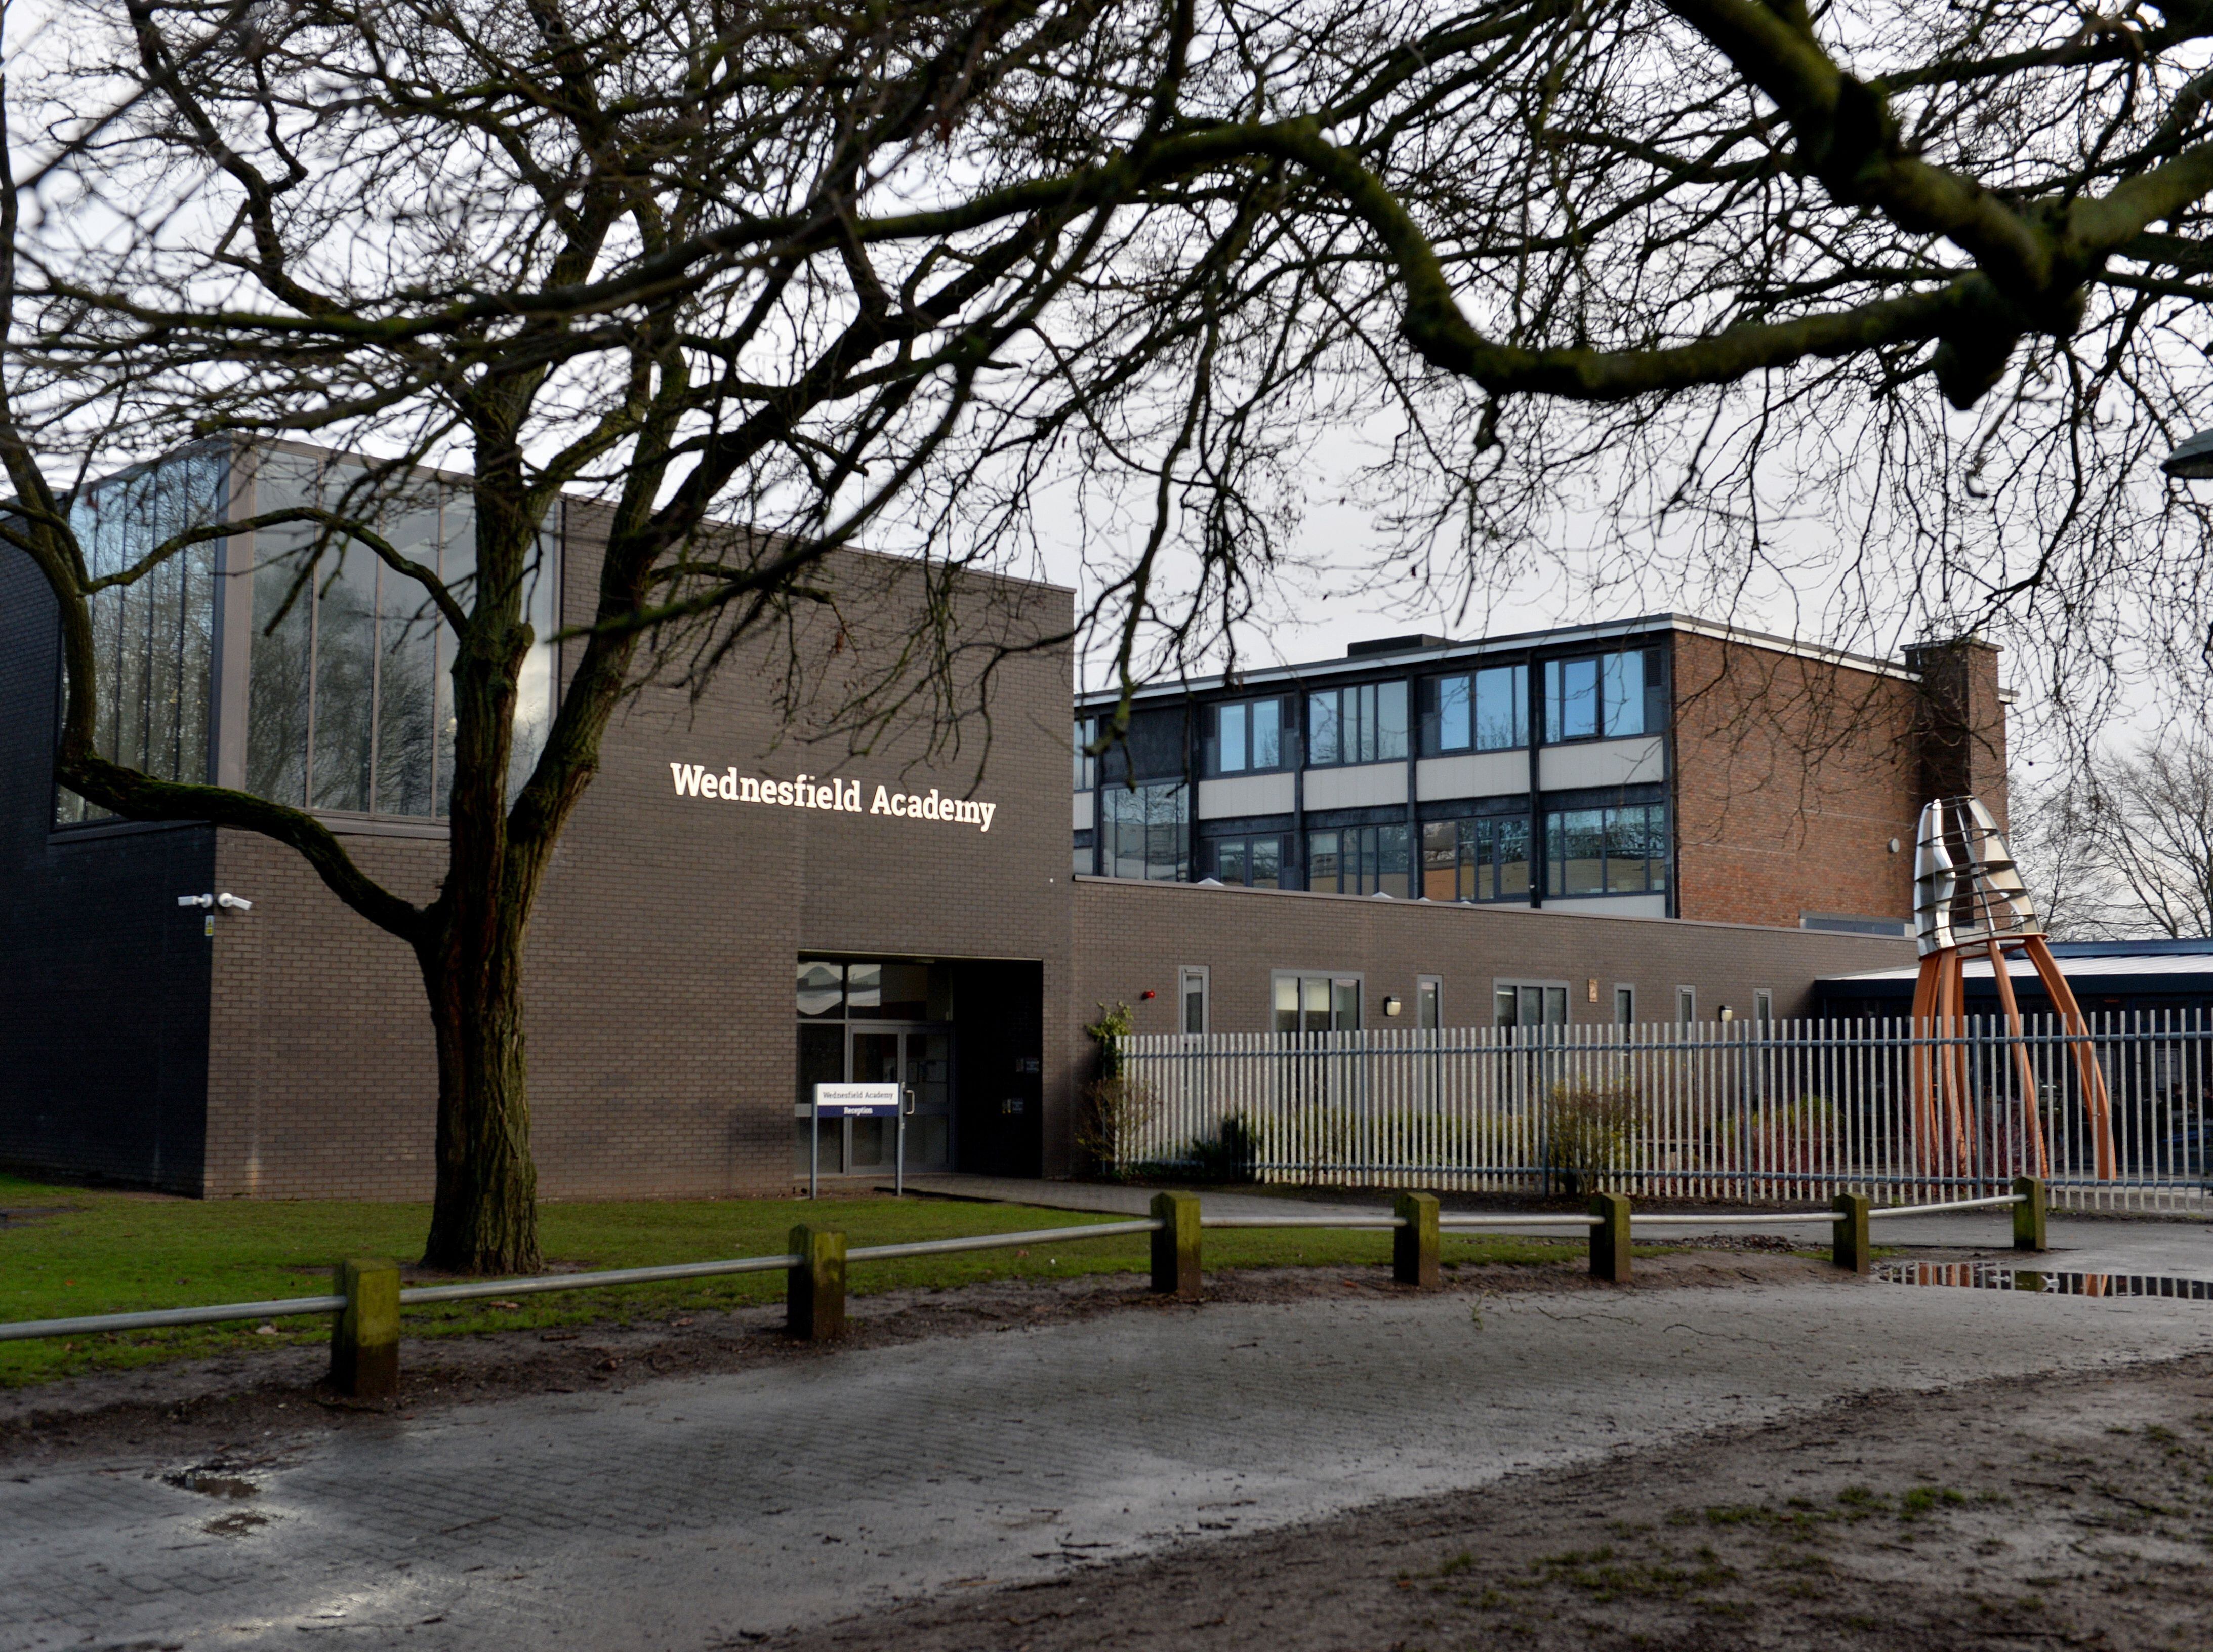 Pupils at Wednesfield school stay in classrooms after man 'tried to access site' before police 'took him away'